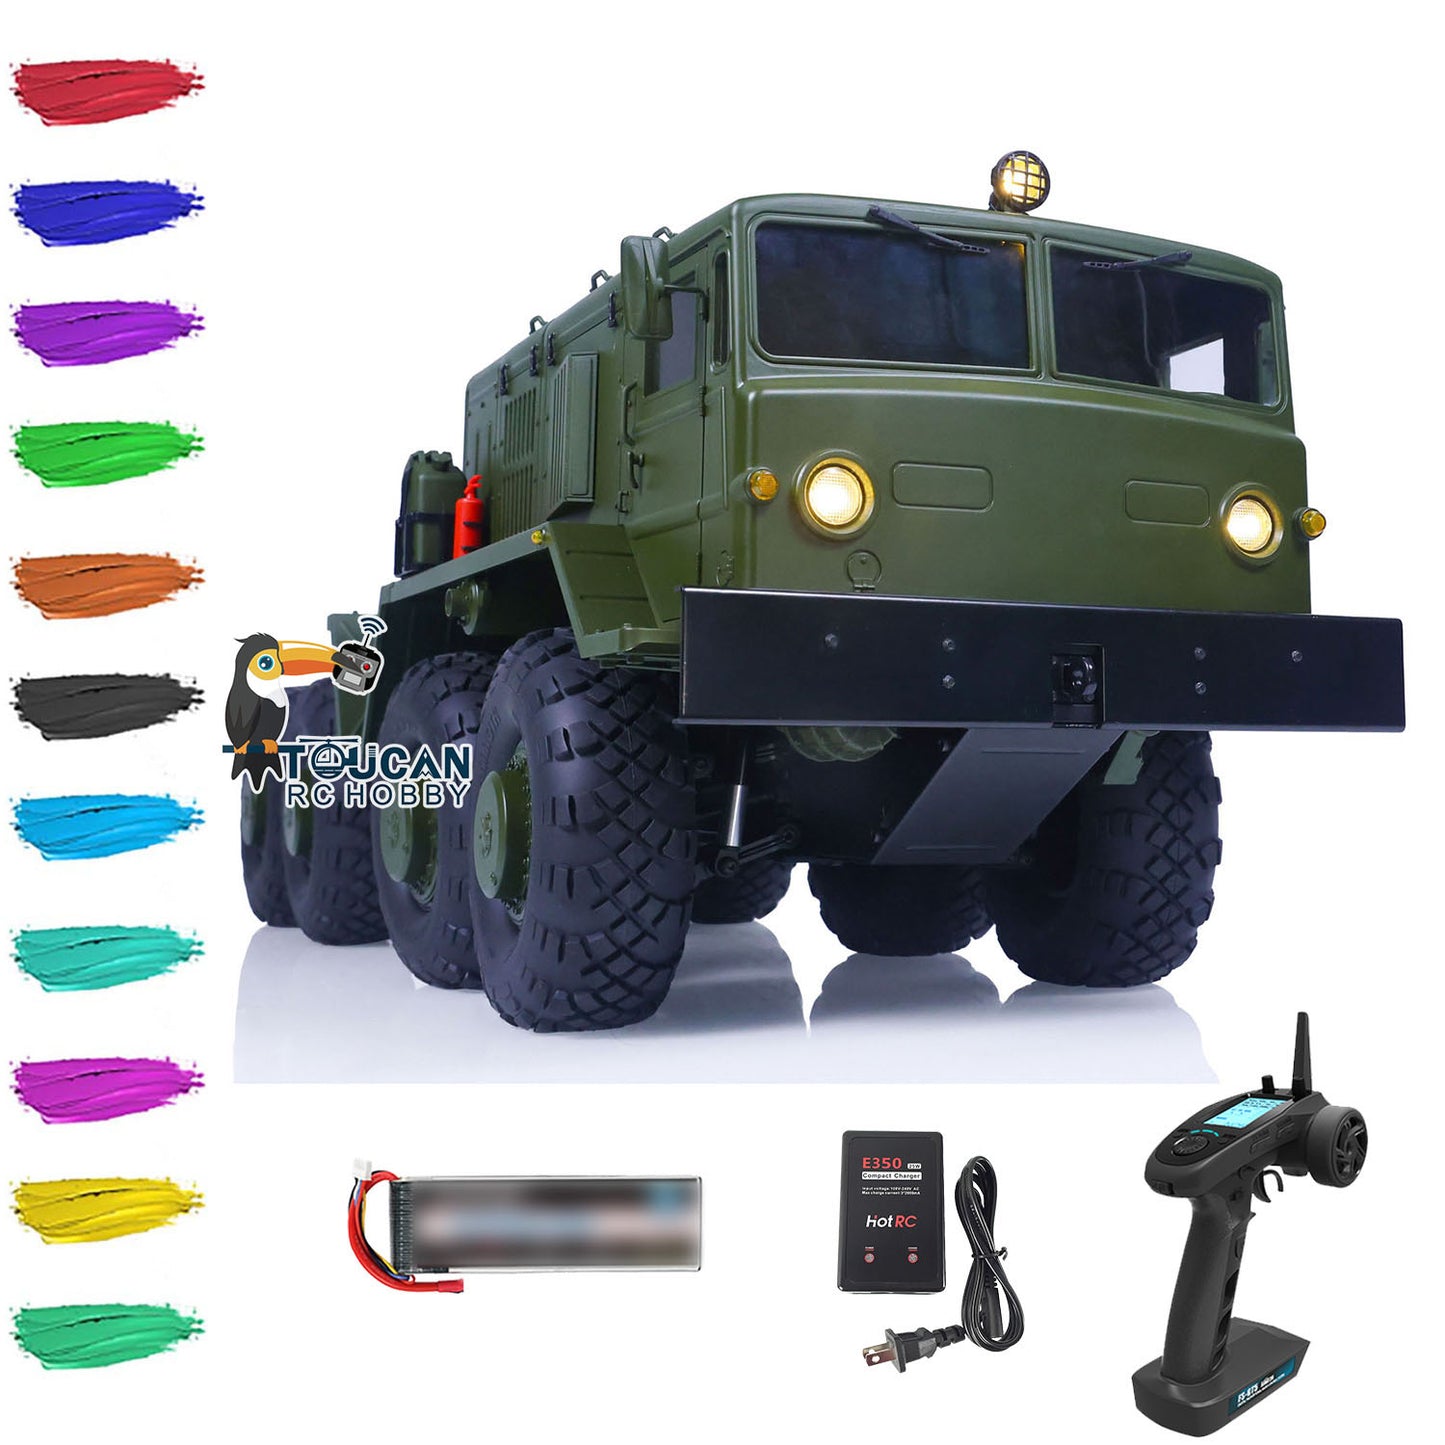 CROSSRC 1/12 8x8 BC8 Military RC Climbing Vehicle Tractor Truck Ready To Run Remote Controlled Crawler Car Hobby Model